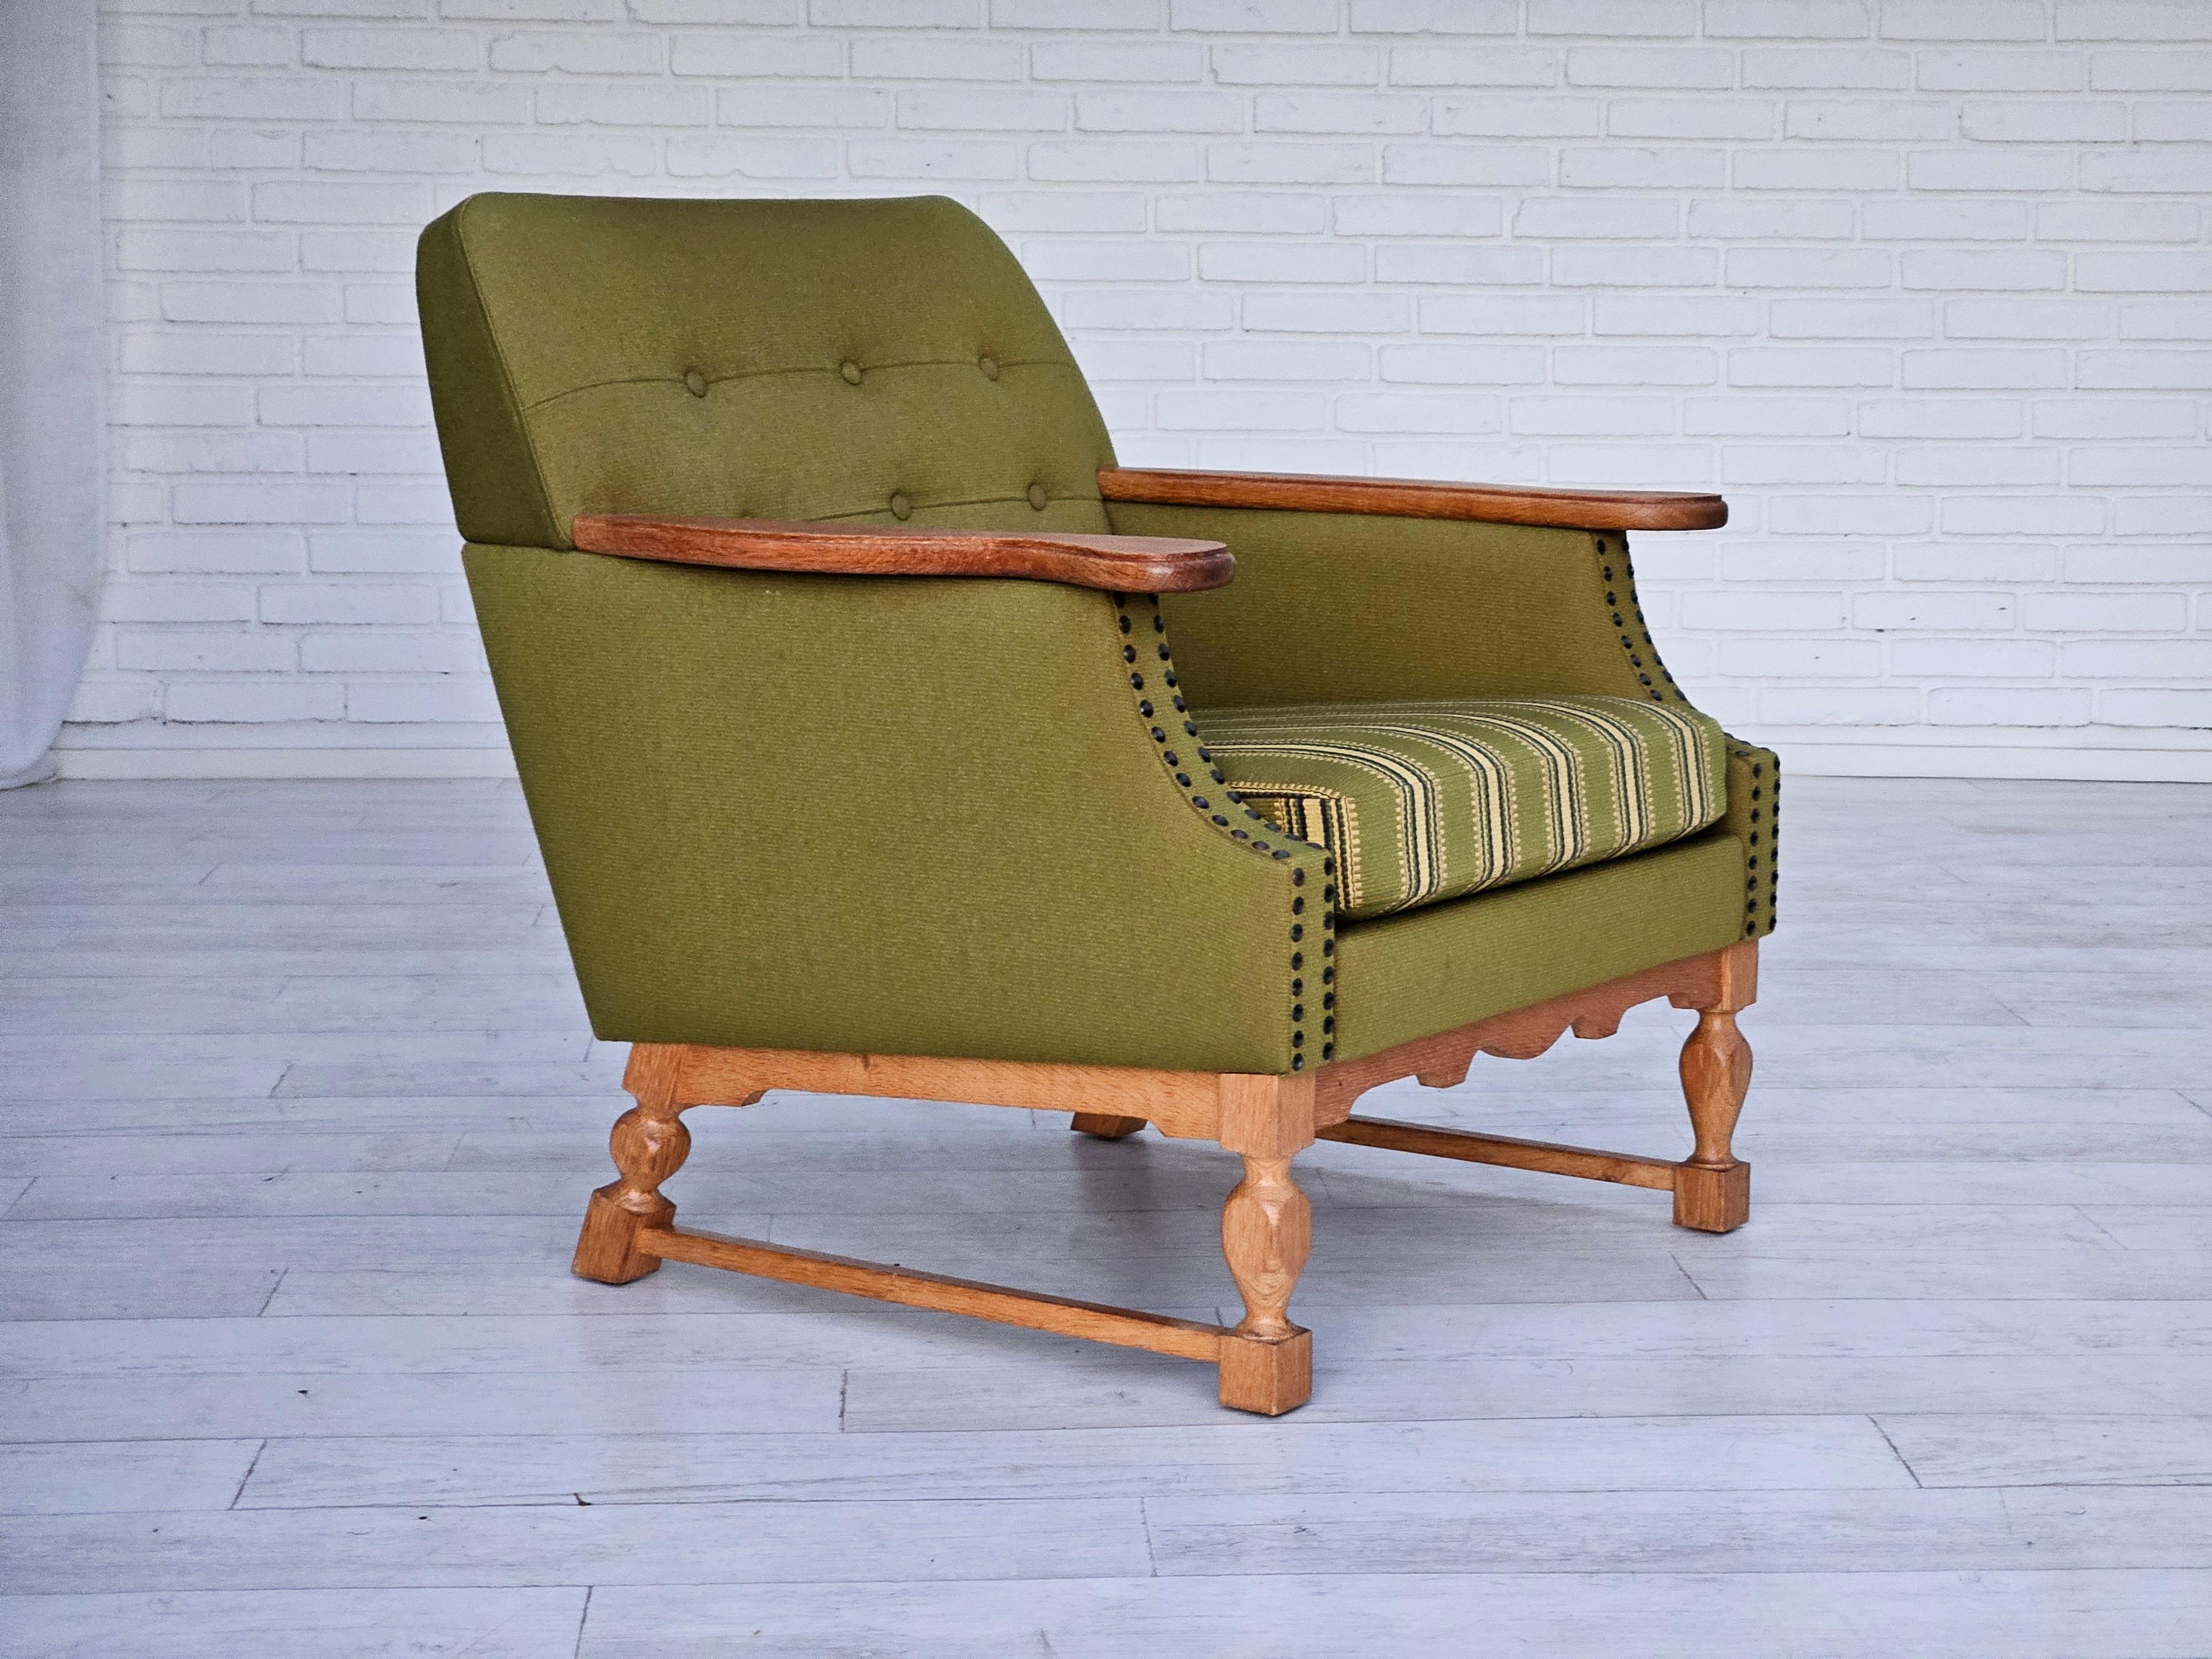 1970s, Danish lounge chair. Original very good condition: no smells and no stains. Original olive green furniture wool. Oak wood legs and armrest. Springs in the seat and back. Manufactured by Danish furniture manufacturer in about 1970s.